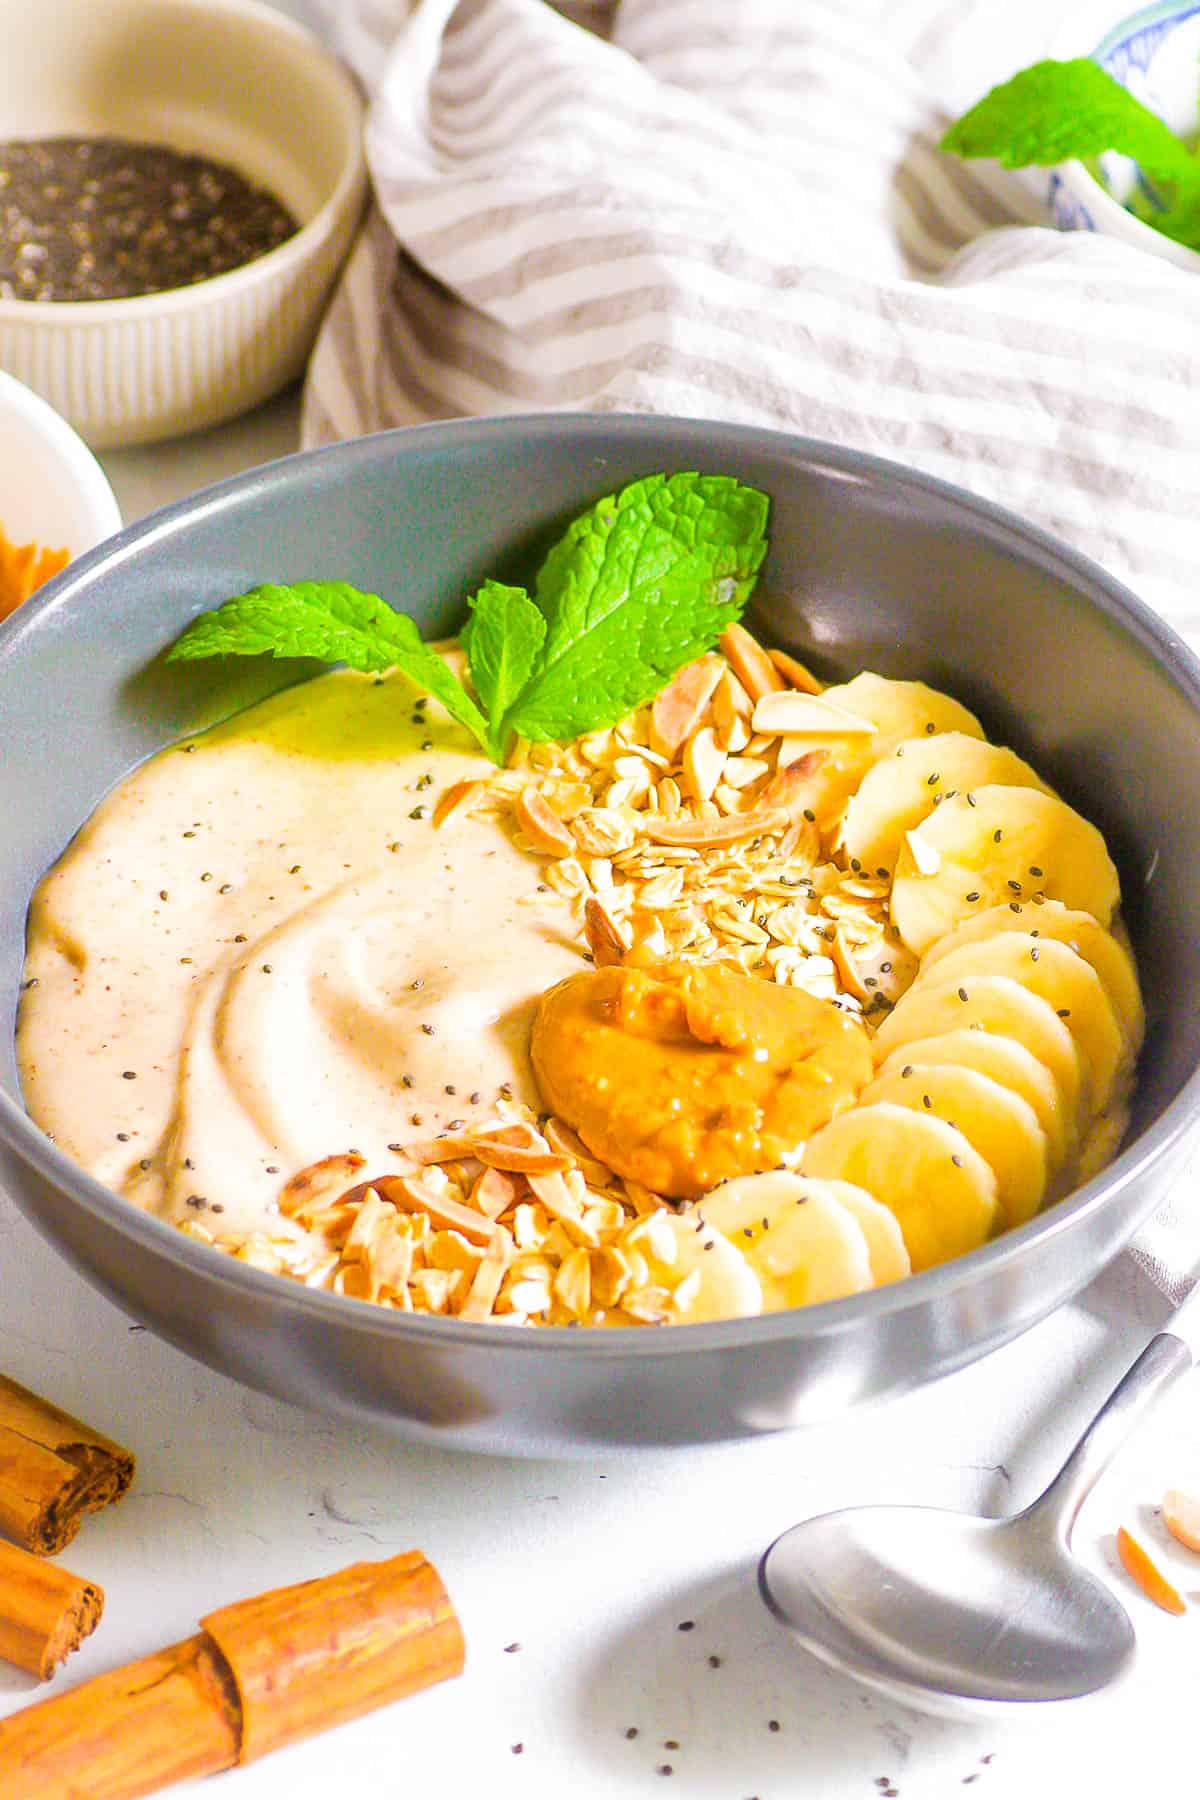 Banana smoothie bowl topped with nut butter, banana slices, nuts and herbs in a grey bowl with a spoon.